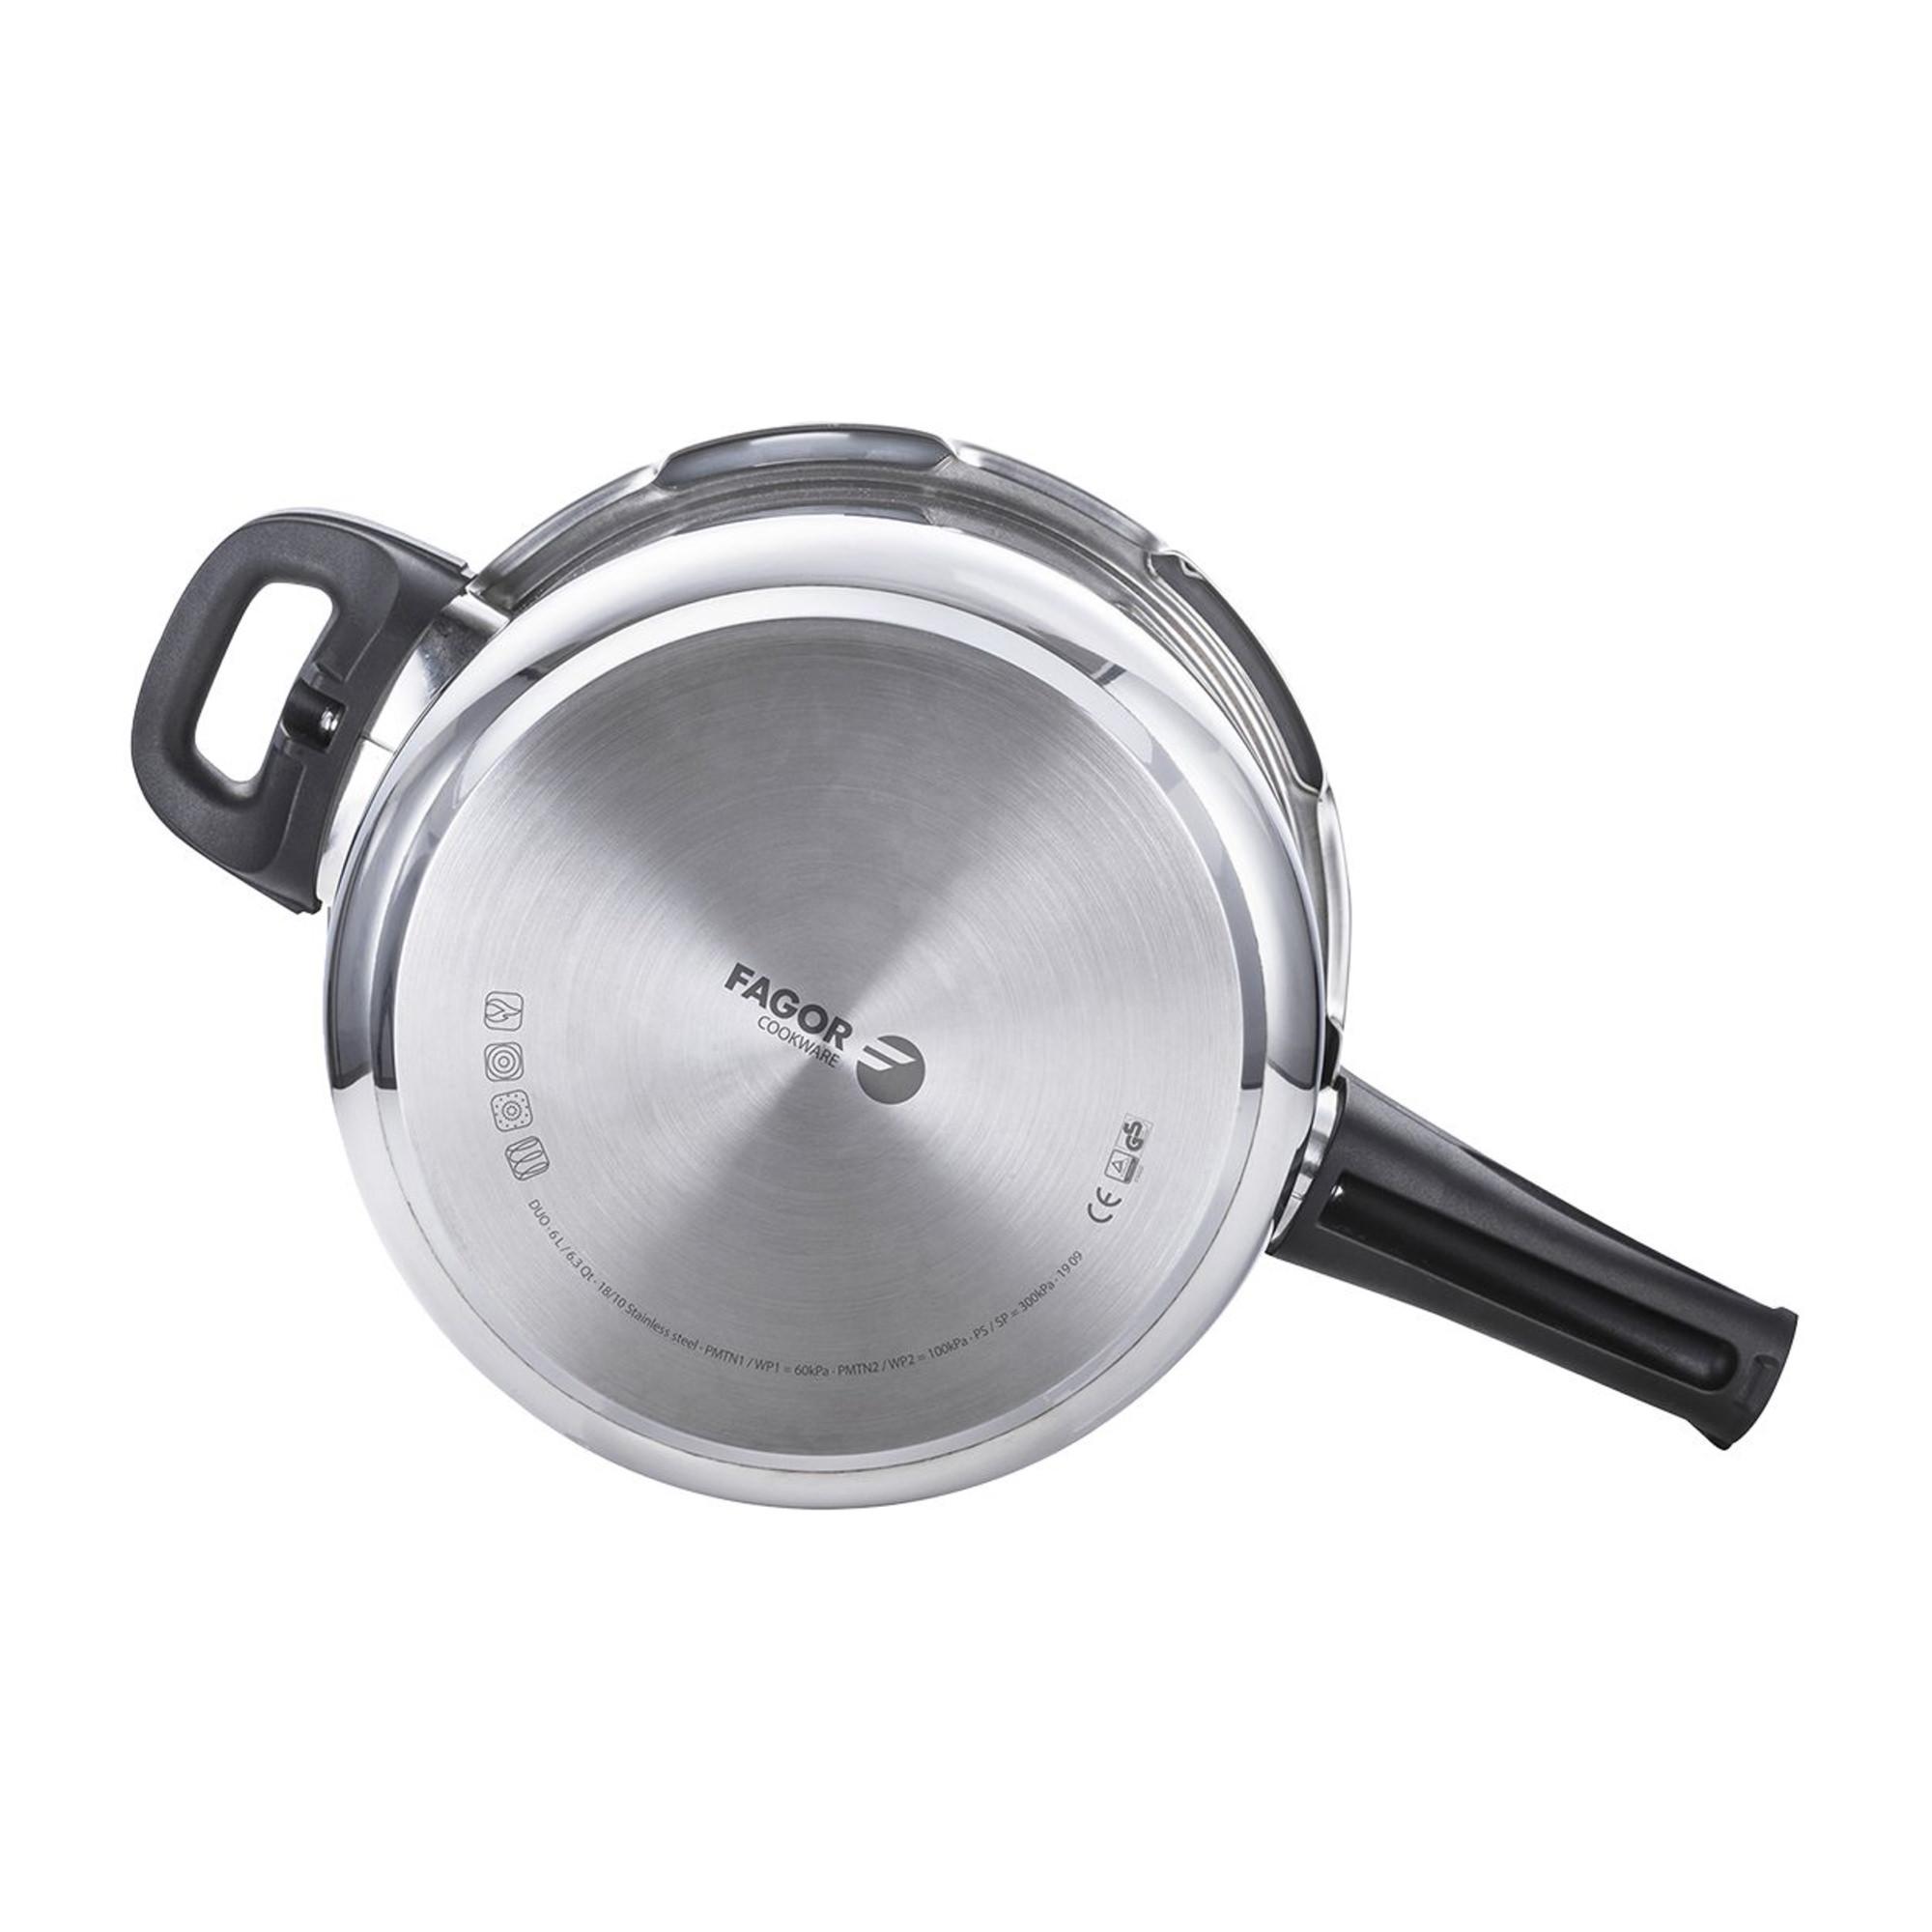 Fagor Duo Stainless Steel Pressure Cooker 6L Image 4